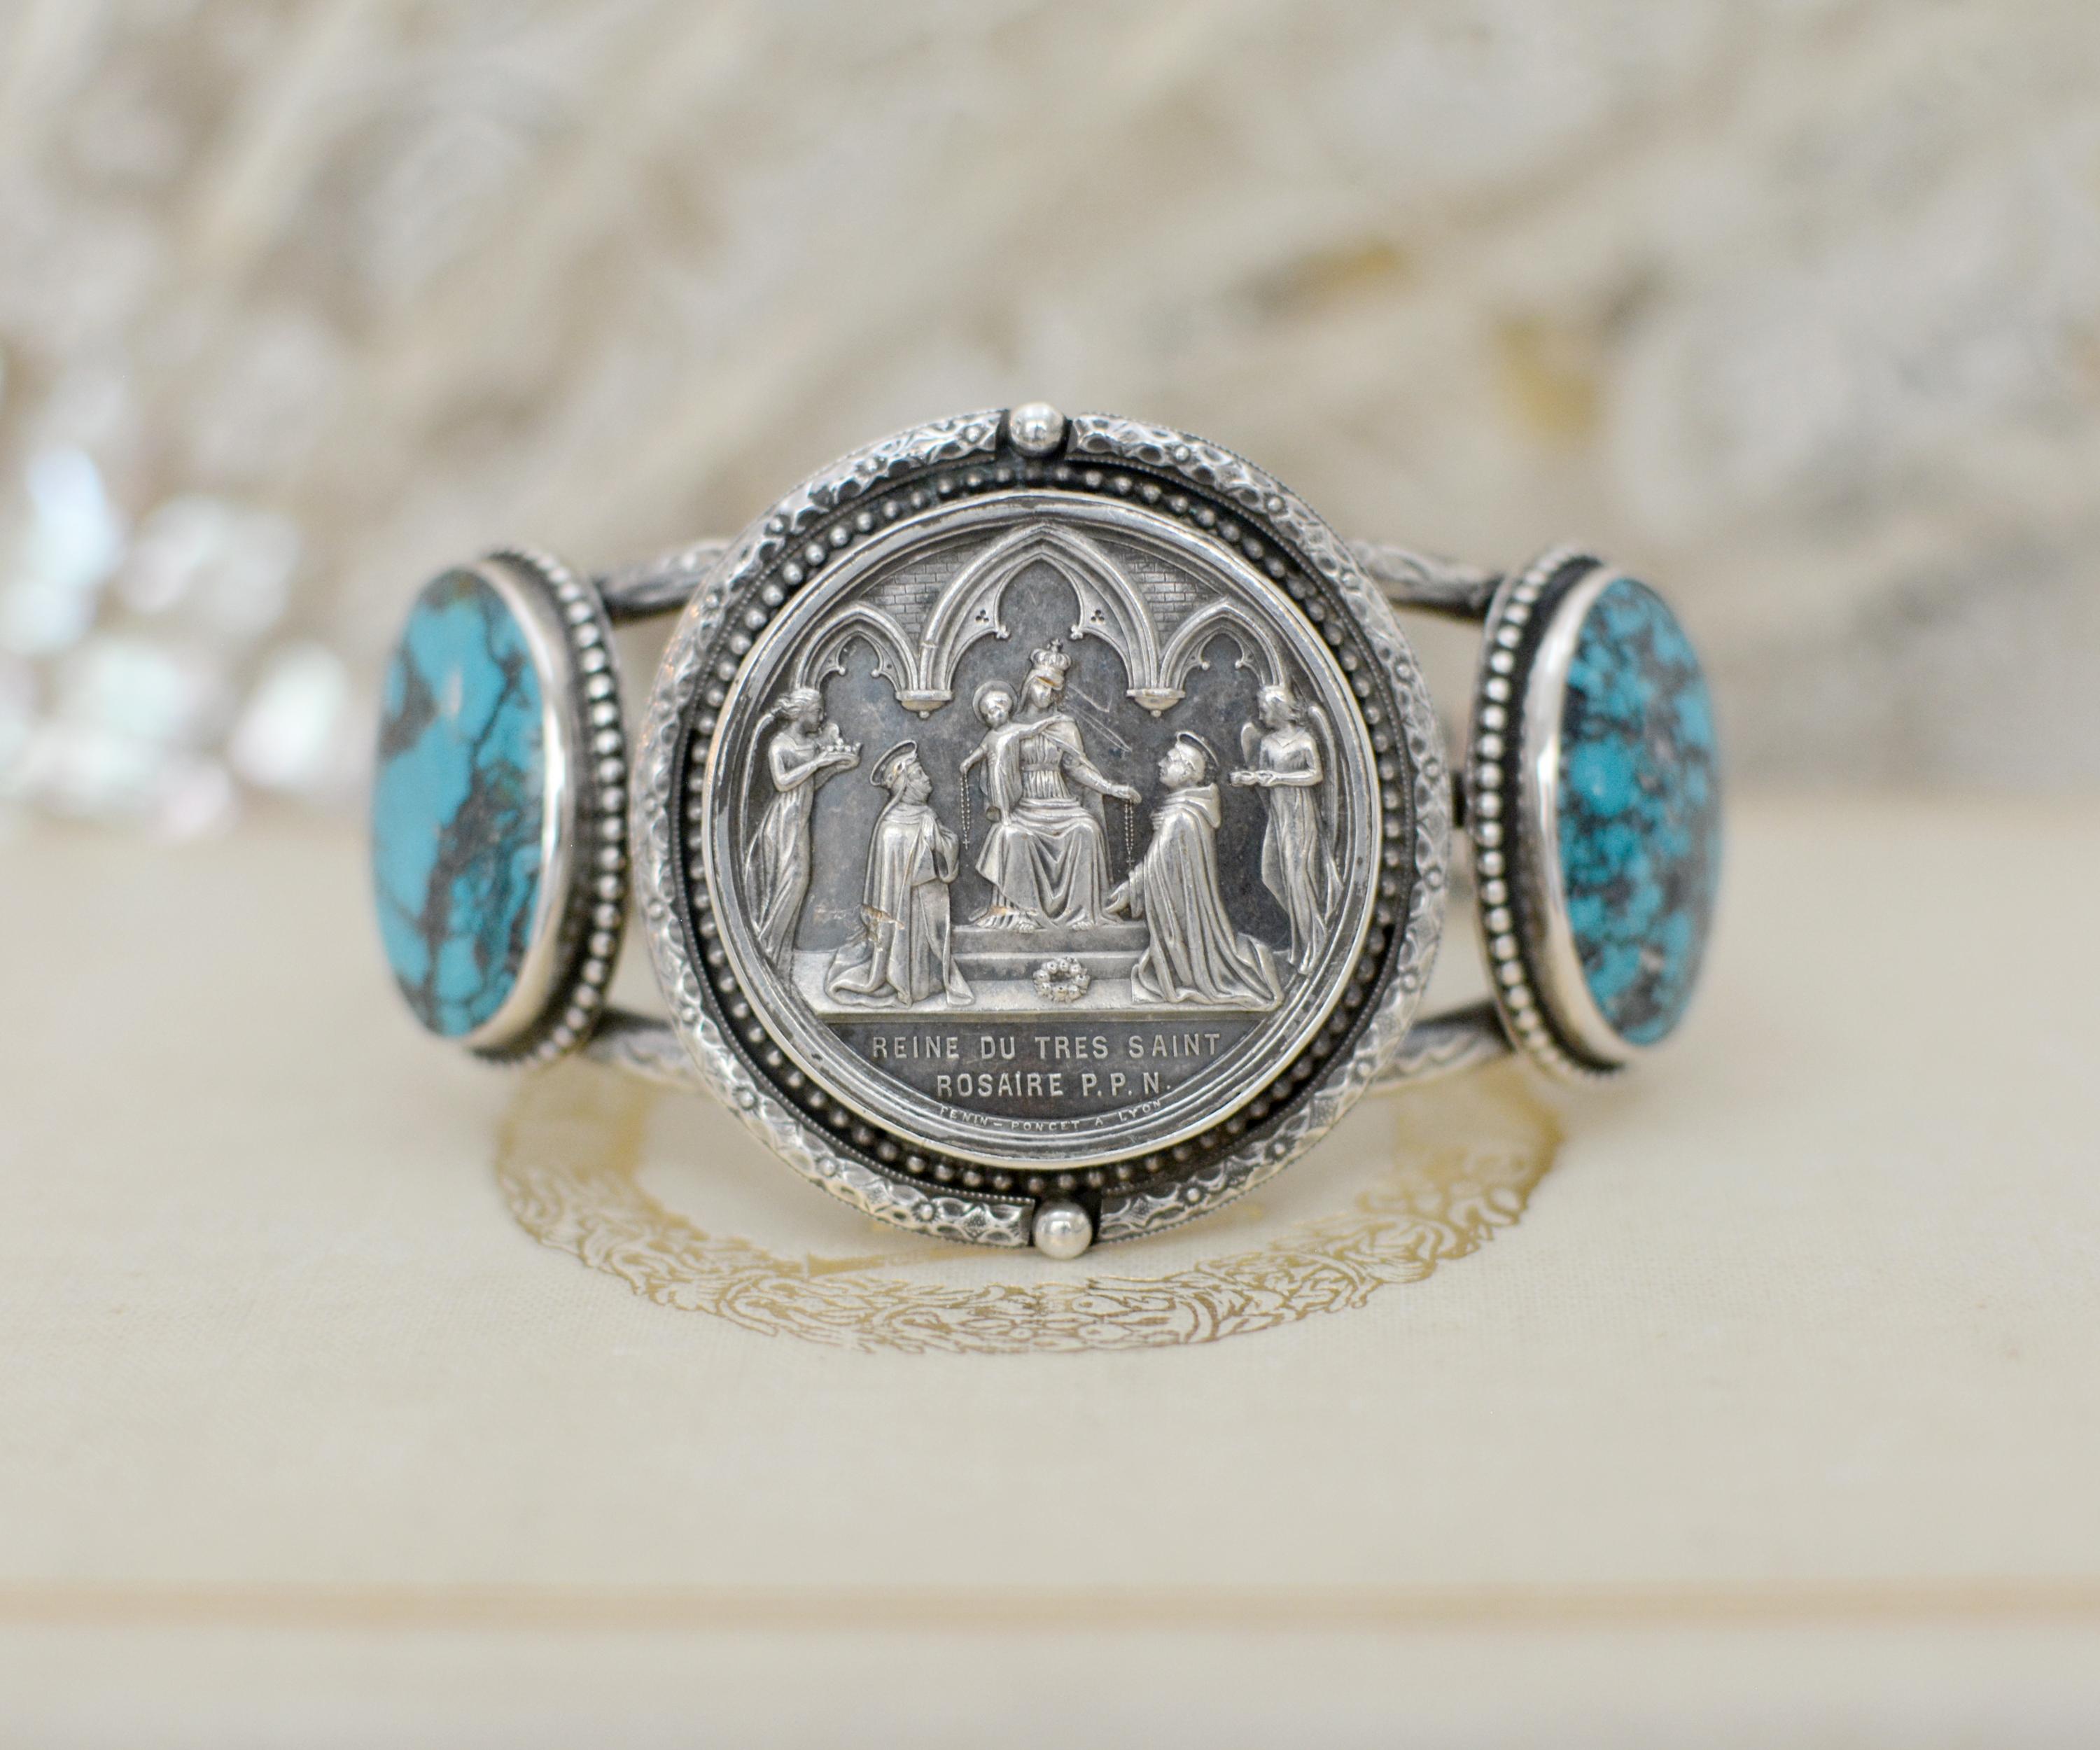 This one of a kind sterling silver cuff bracelet features an original antique nineteenth century French Marriage Medal, depicting Mother Mary with her Baby Jesus at her side. Beneath the kneeling couple are the words : 